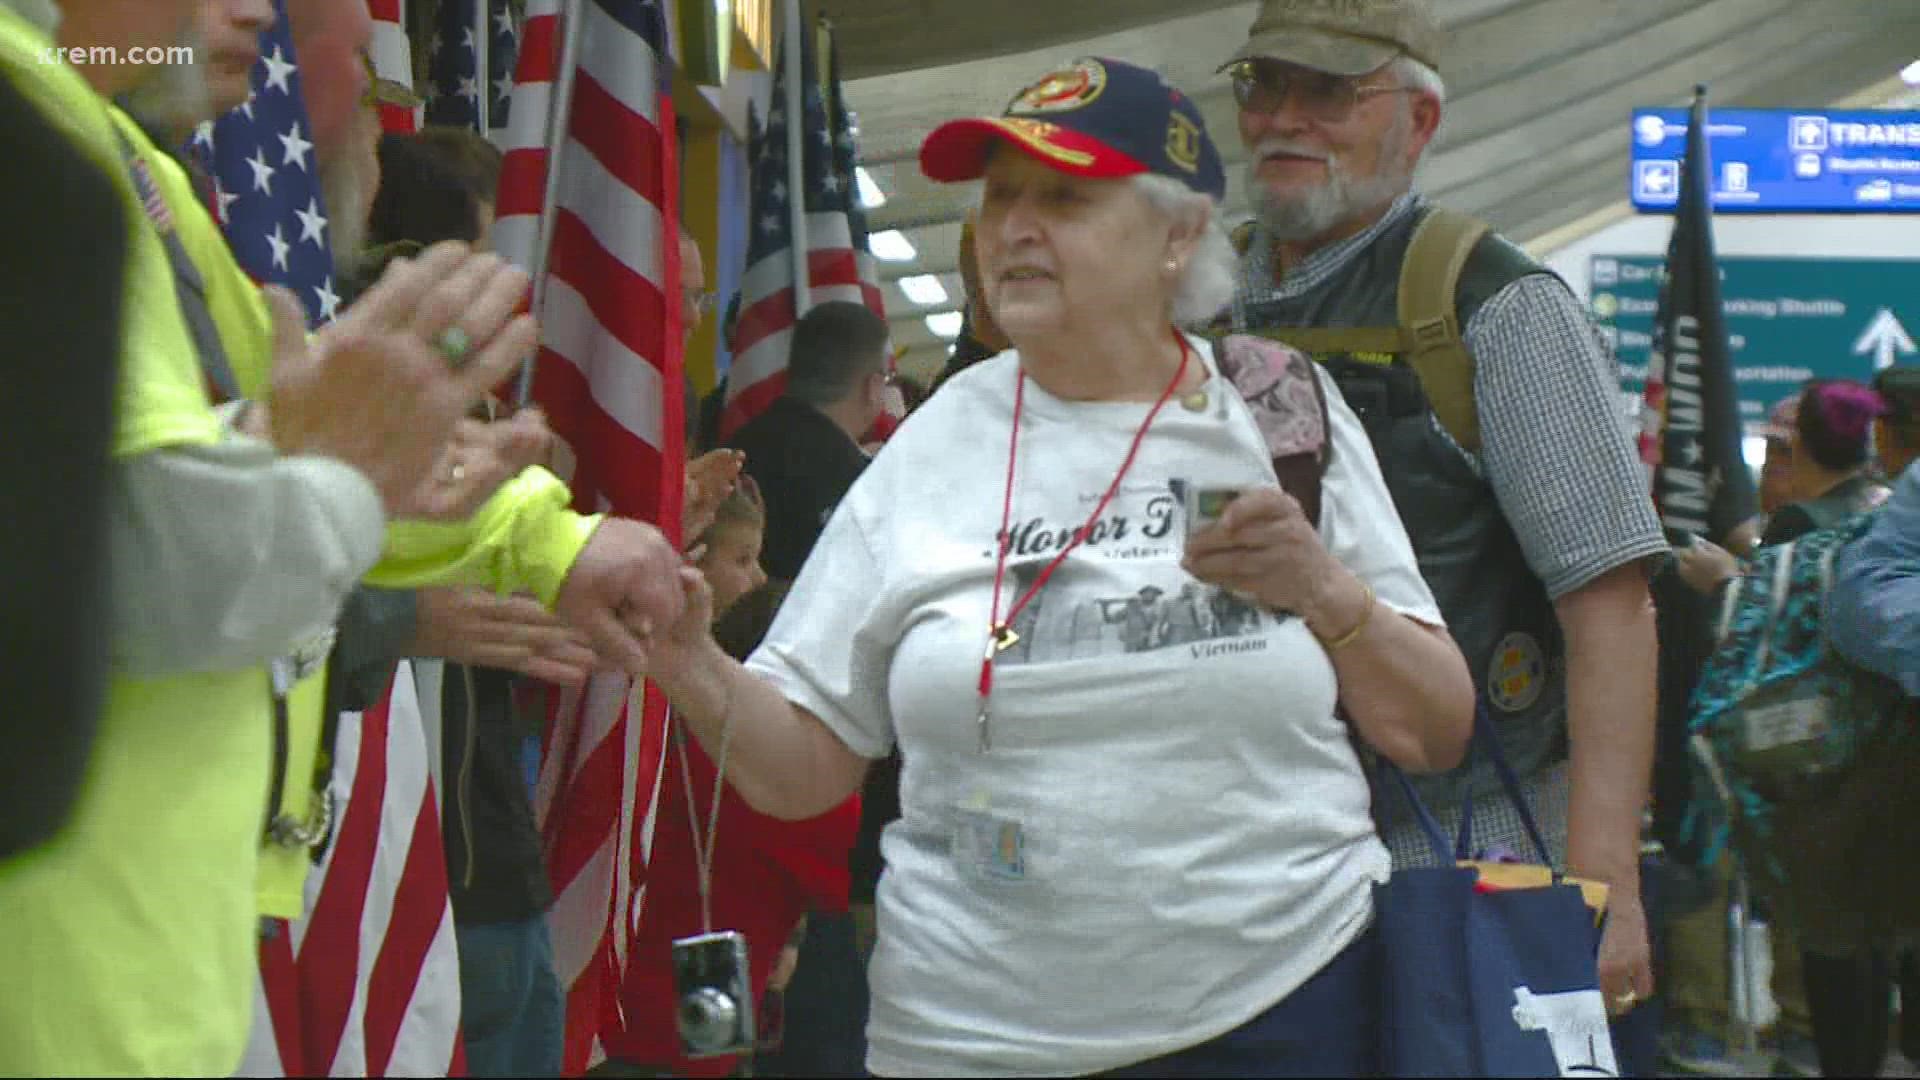 Louise Griffin served in the U.S. Marine Corps and says the trip was more than she could have imagined.